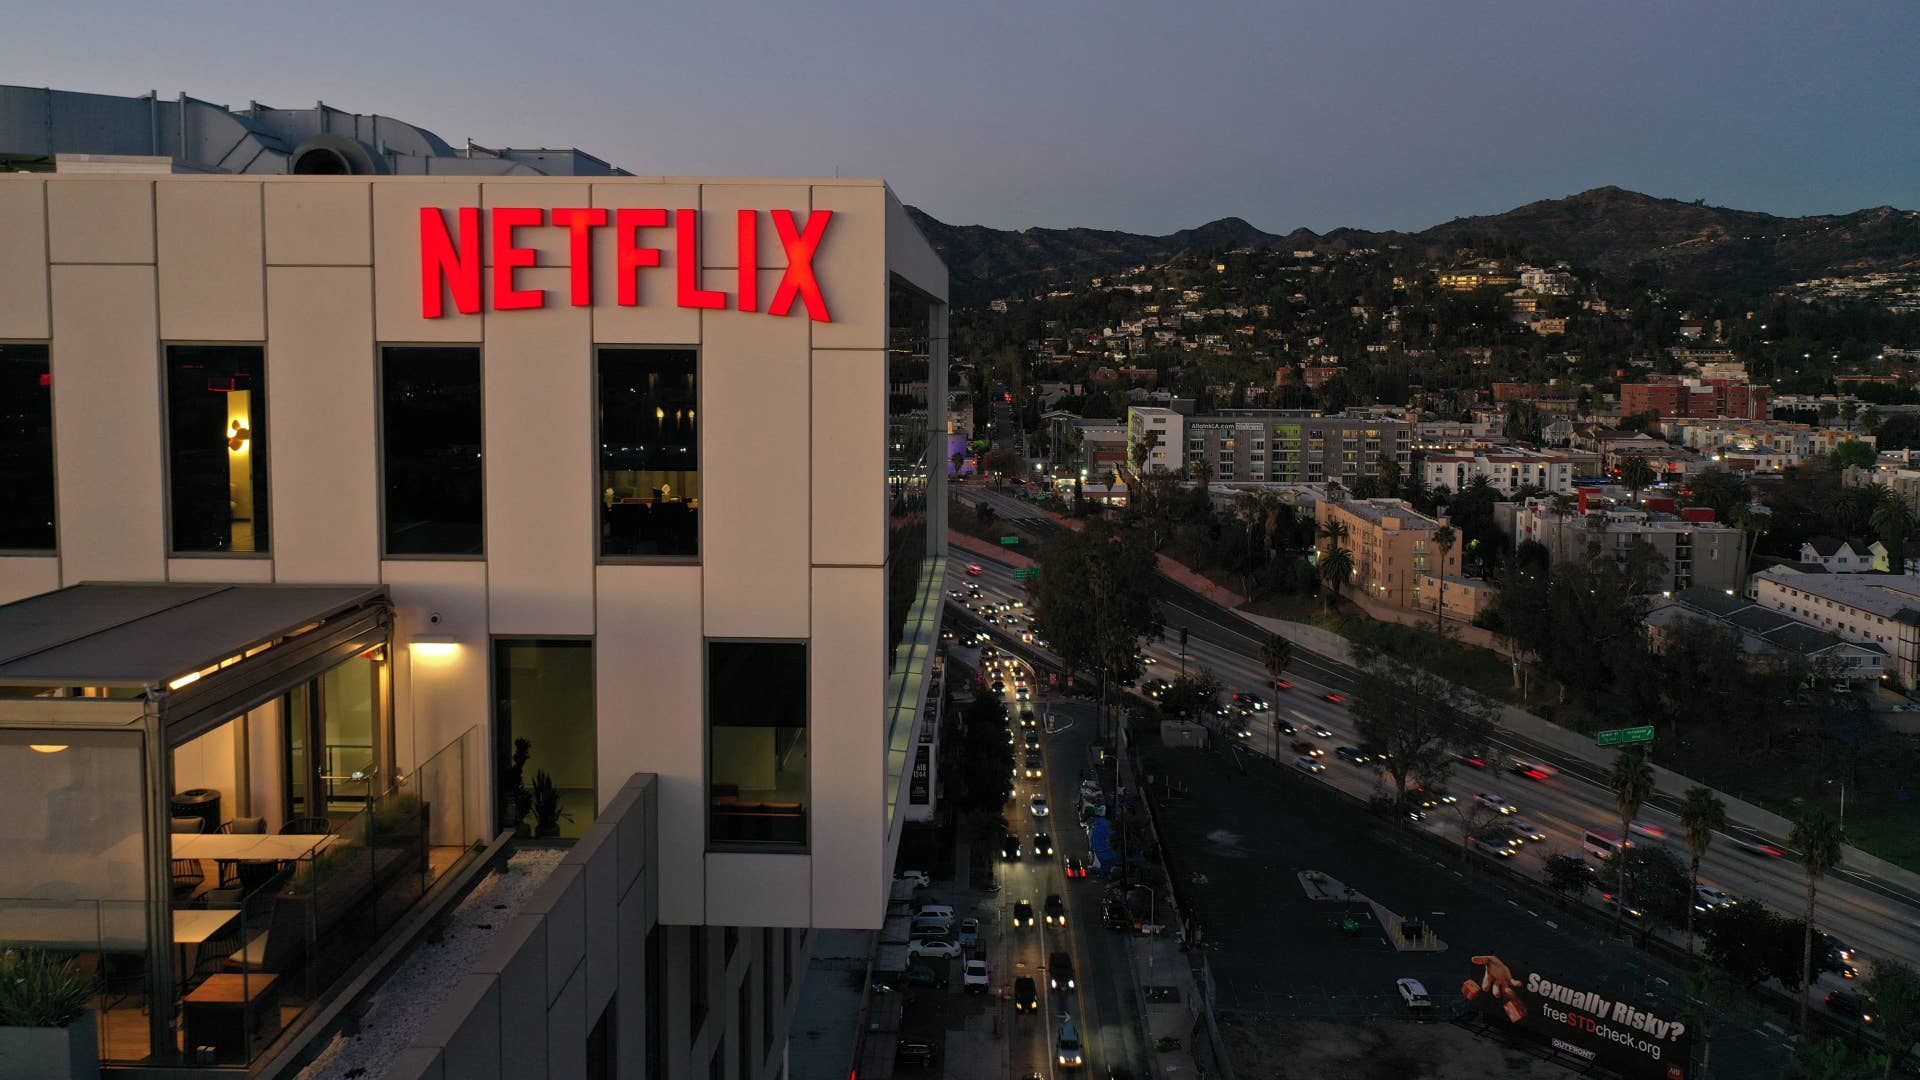 The Netflix building and skyline is shown